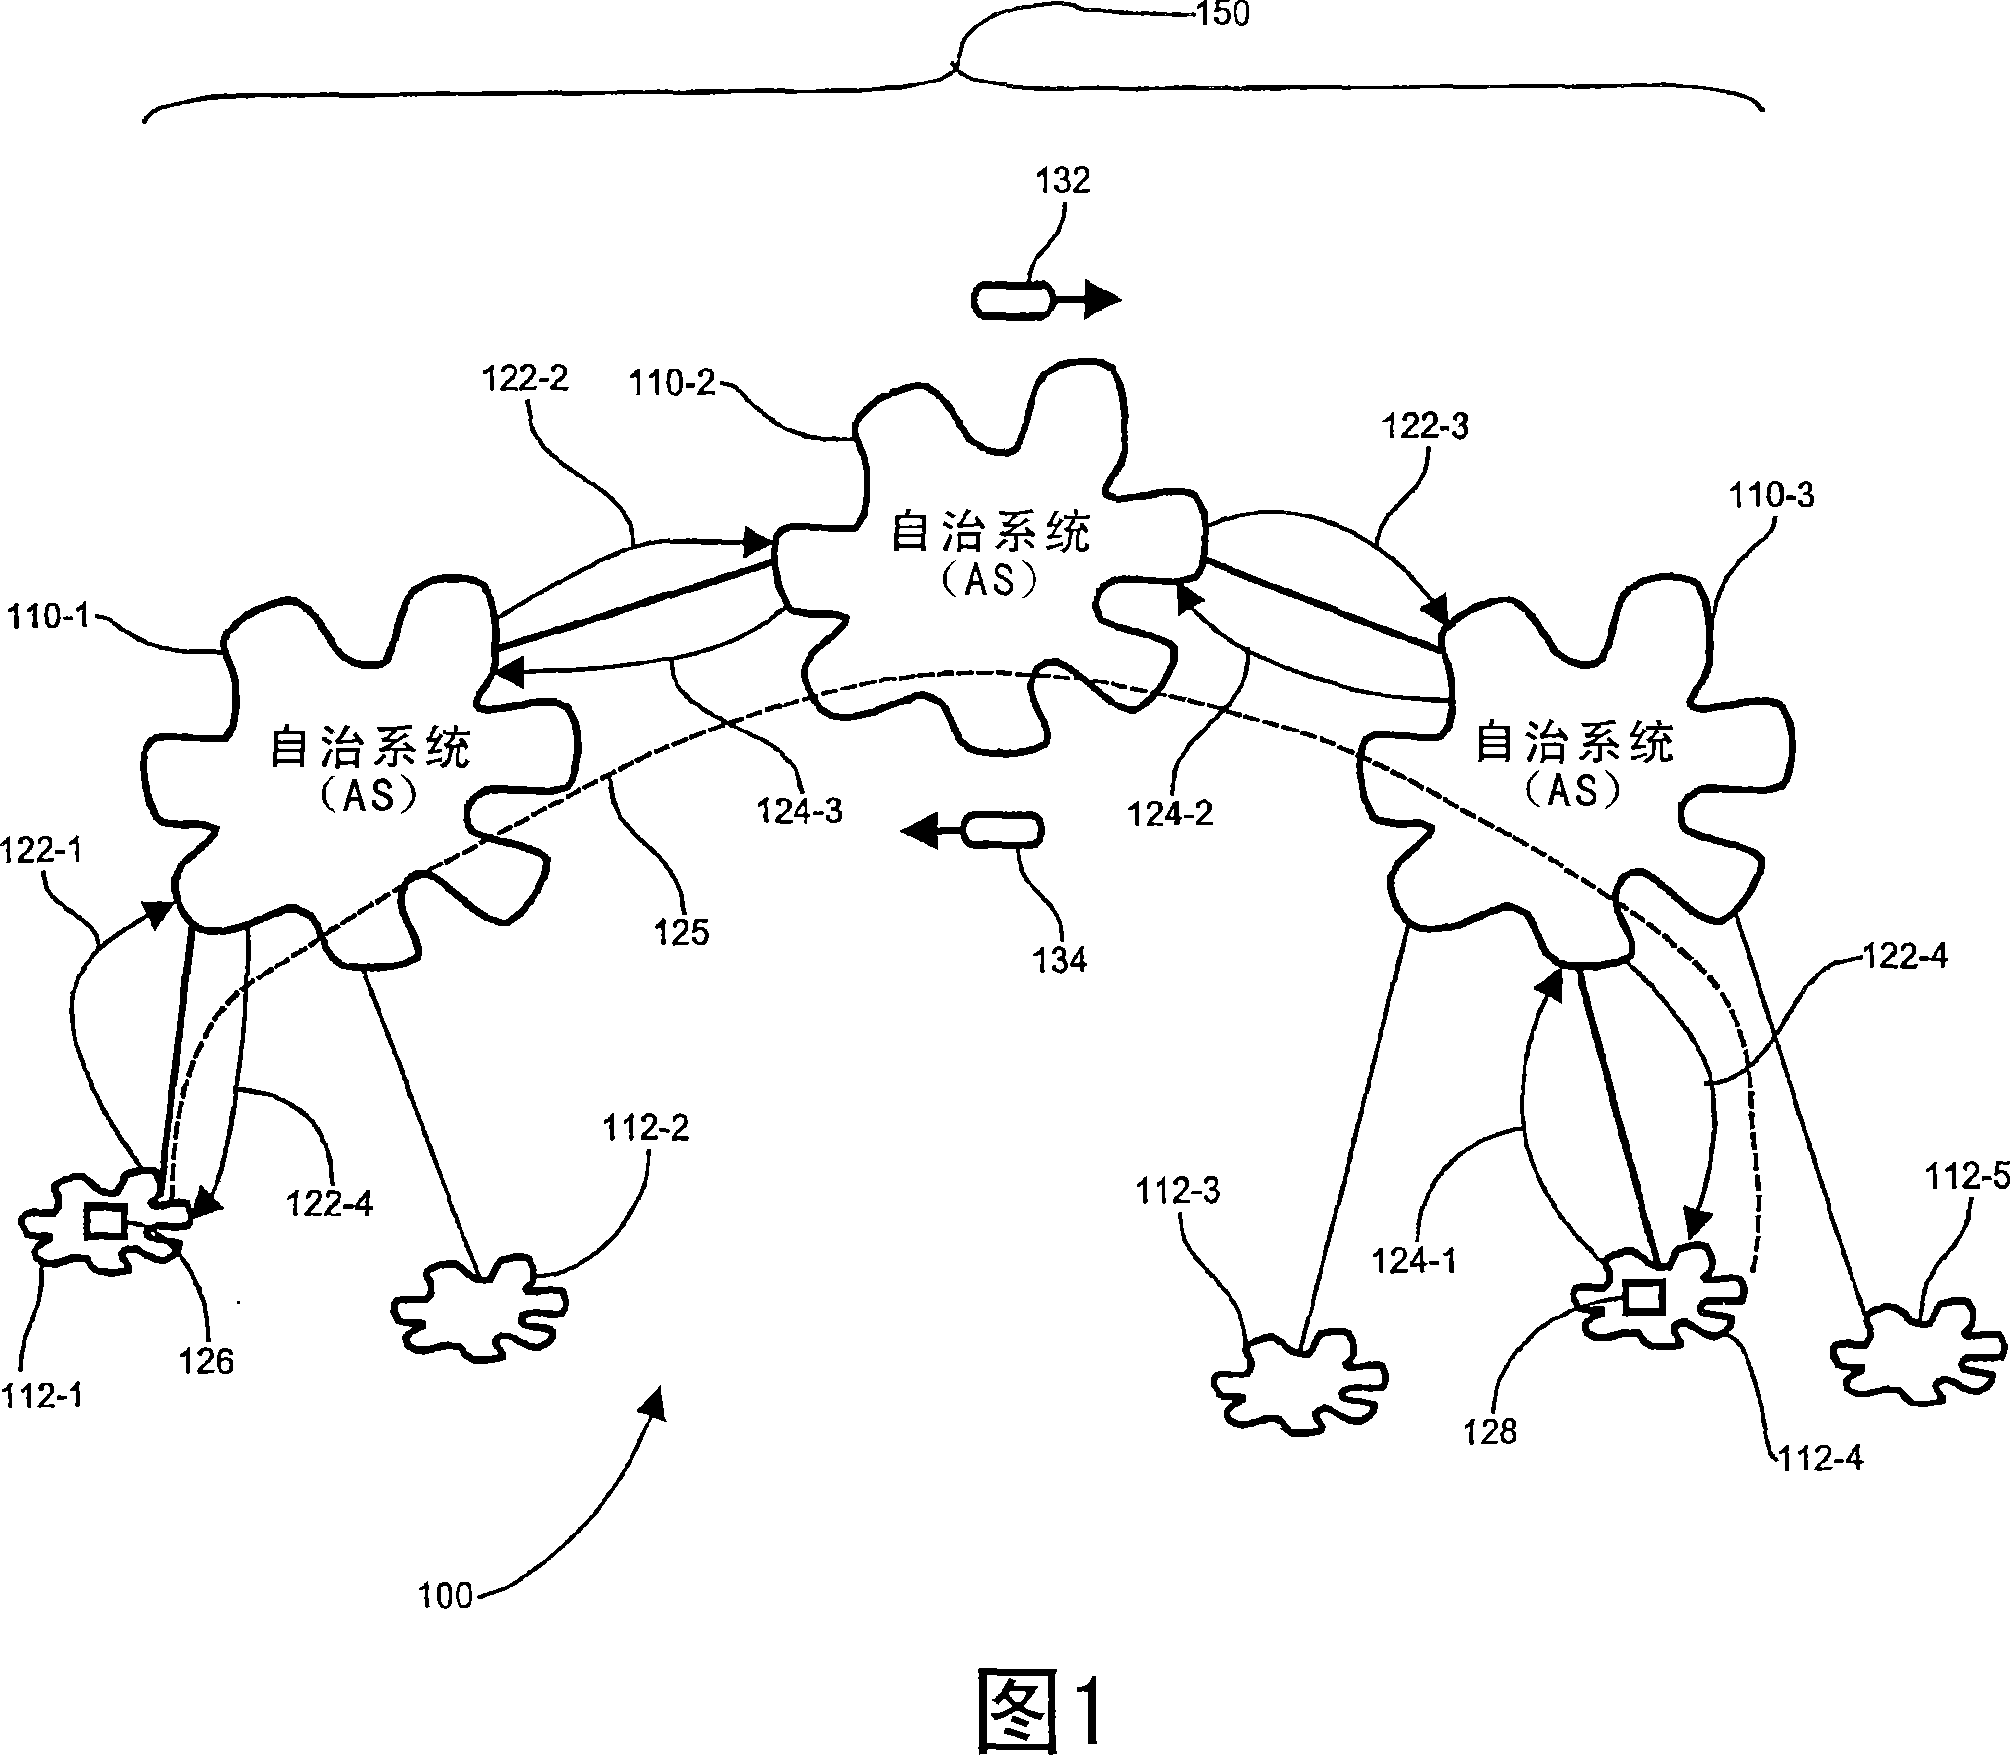 System and methods for network reachability detection